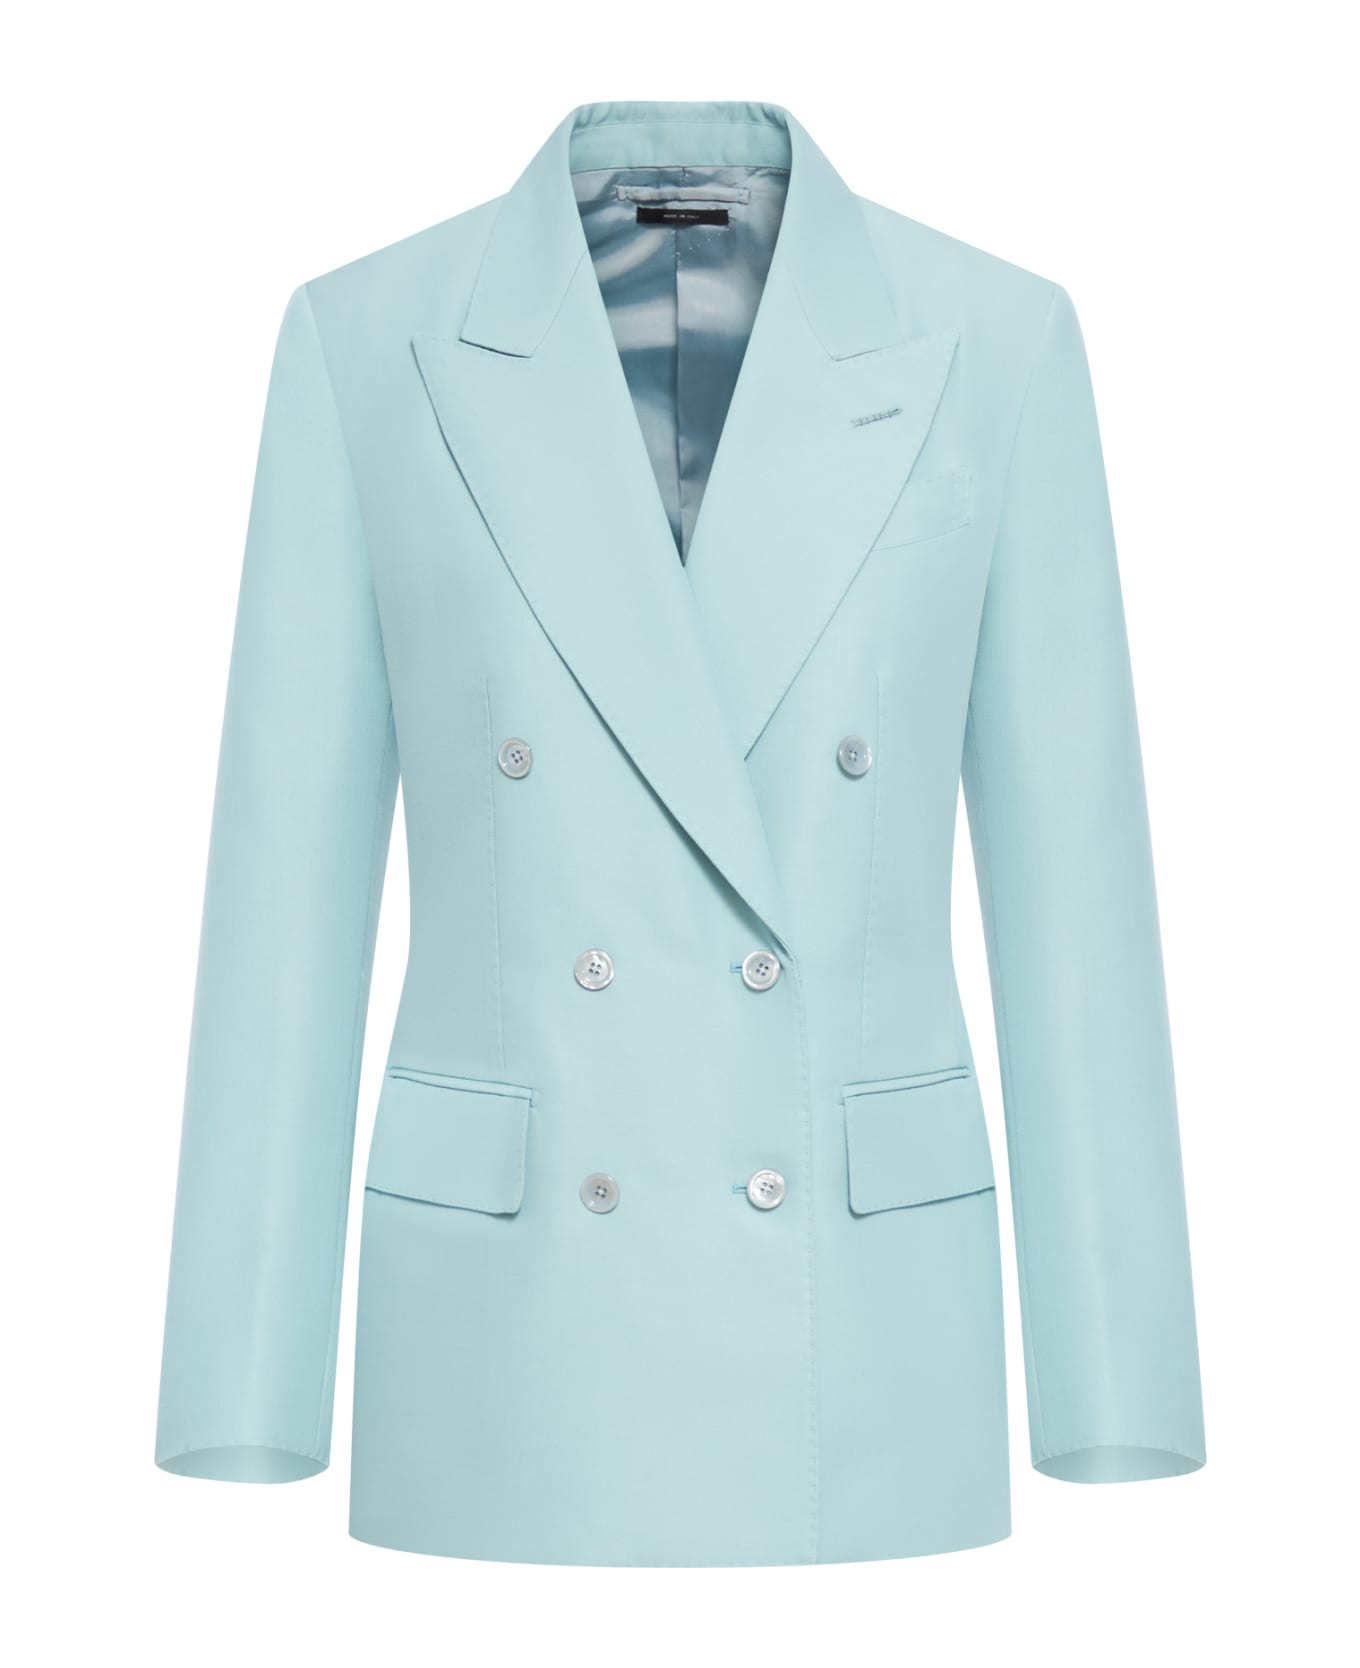 Tom Ford Compact Hopsack Wool Blend Double Breasted Jacket - Light Turquoise